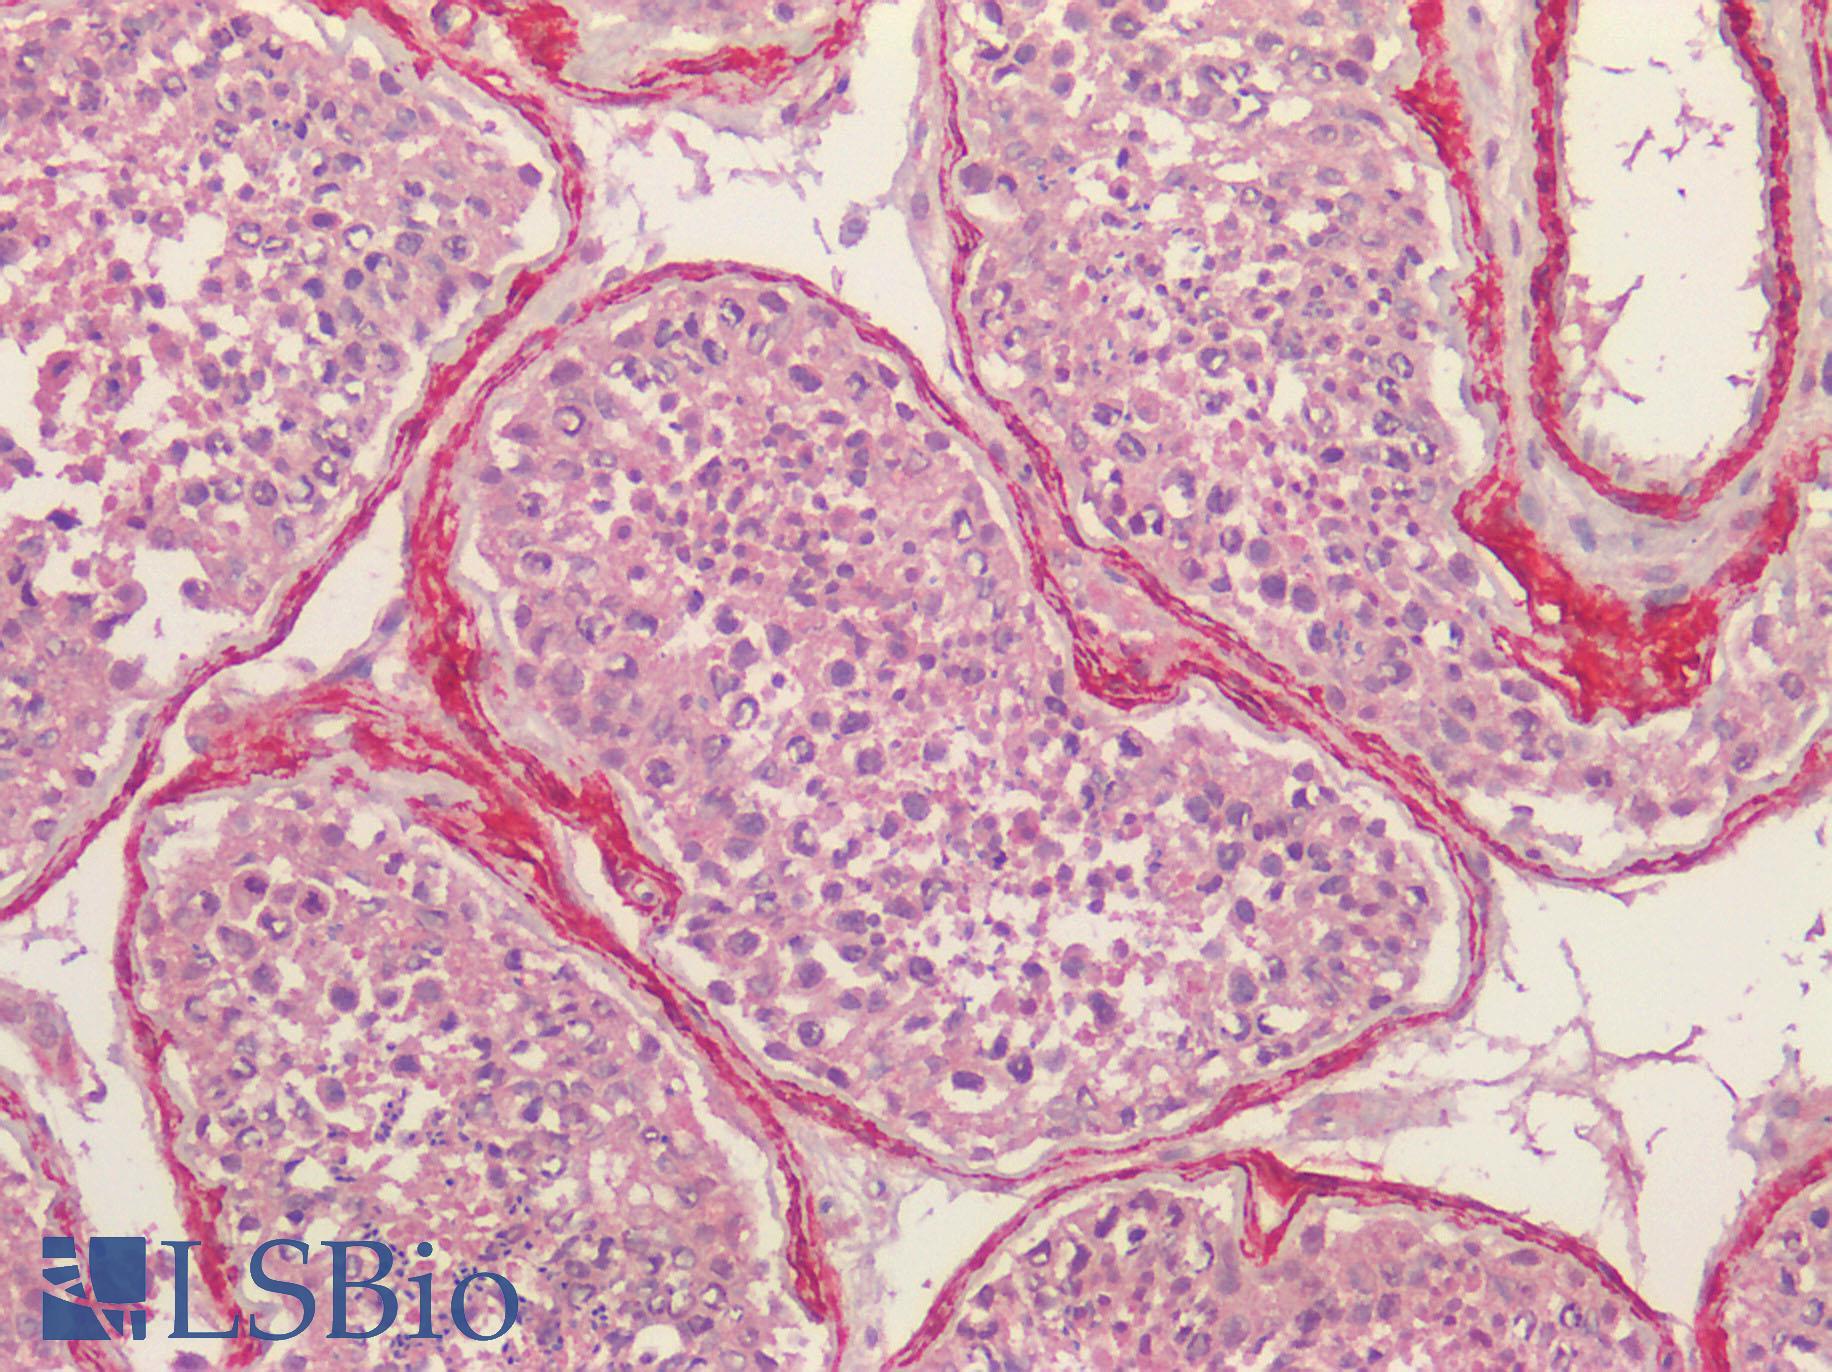 ACTA2 / Smooth Muscle Actin Antibody - Human Testis: Formalin-Fixed, Paraffin-Embedded (FFPE) HIER using 10 mM sodium citrate buffer pH 6.0